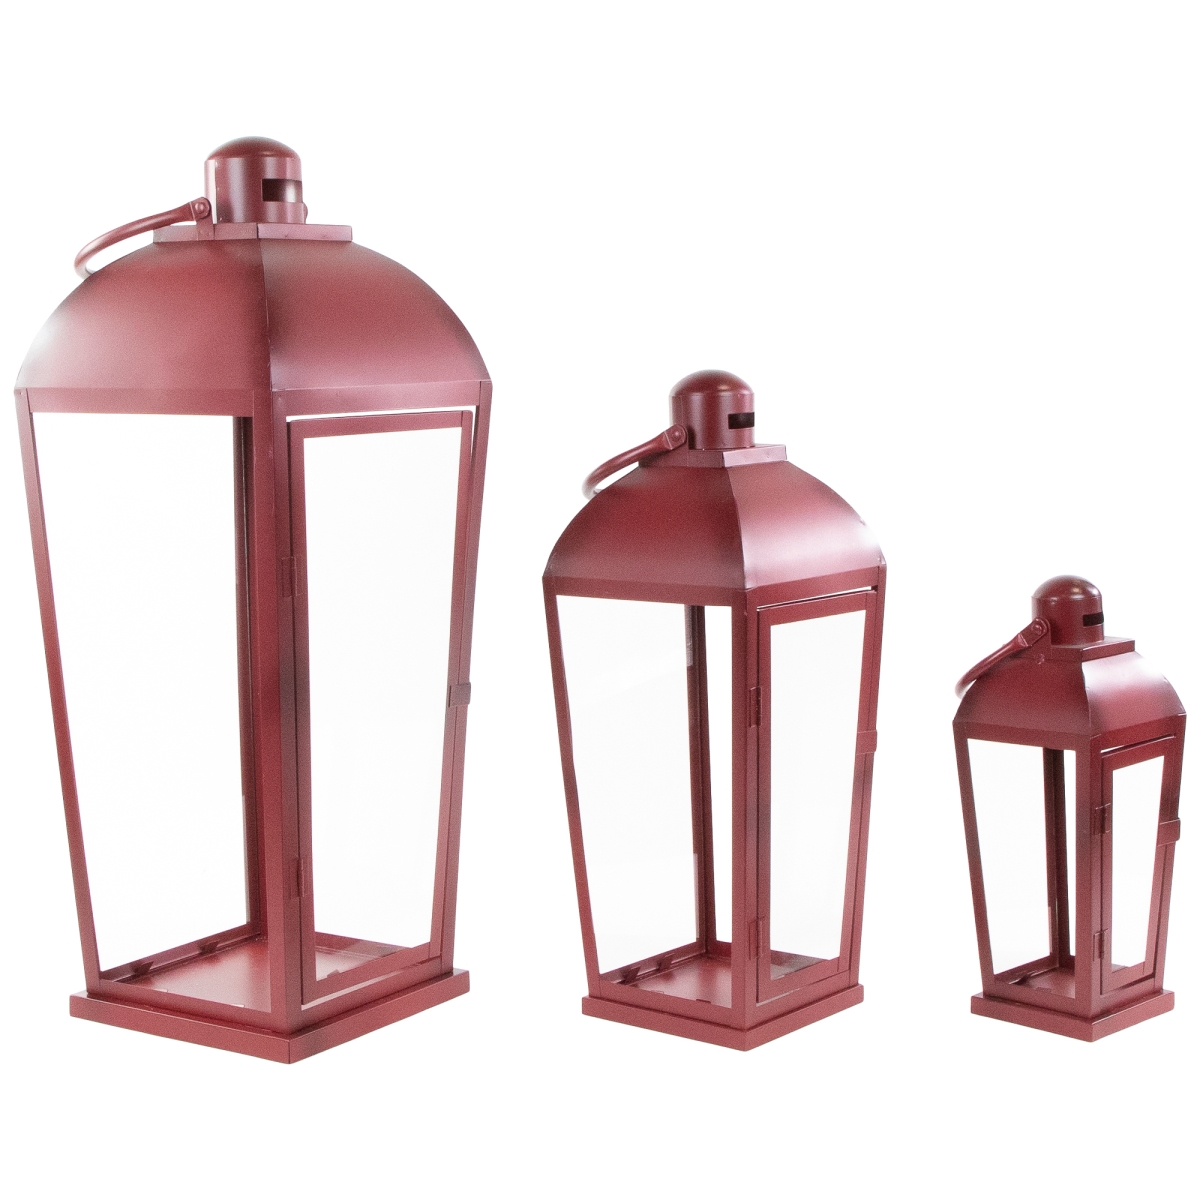 Picture of Northlight 35132874 23.5 in.Antique Style Candle Lanterns, Red - Set of 3